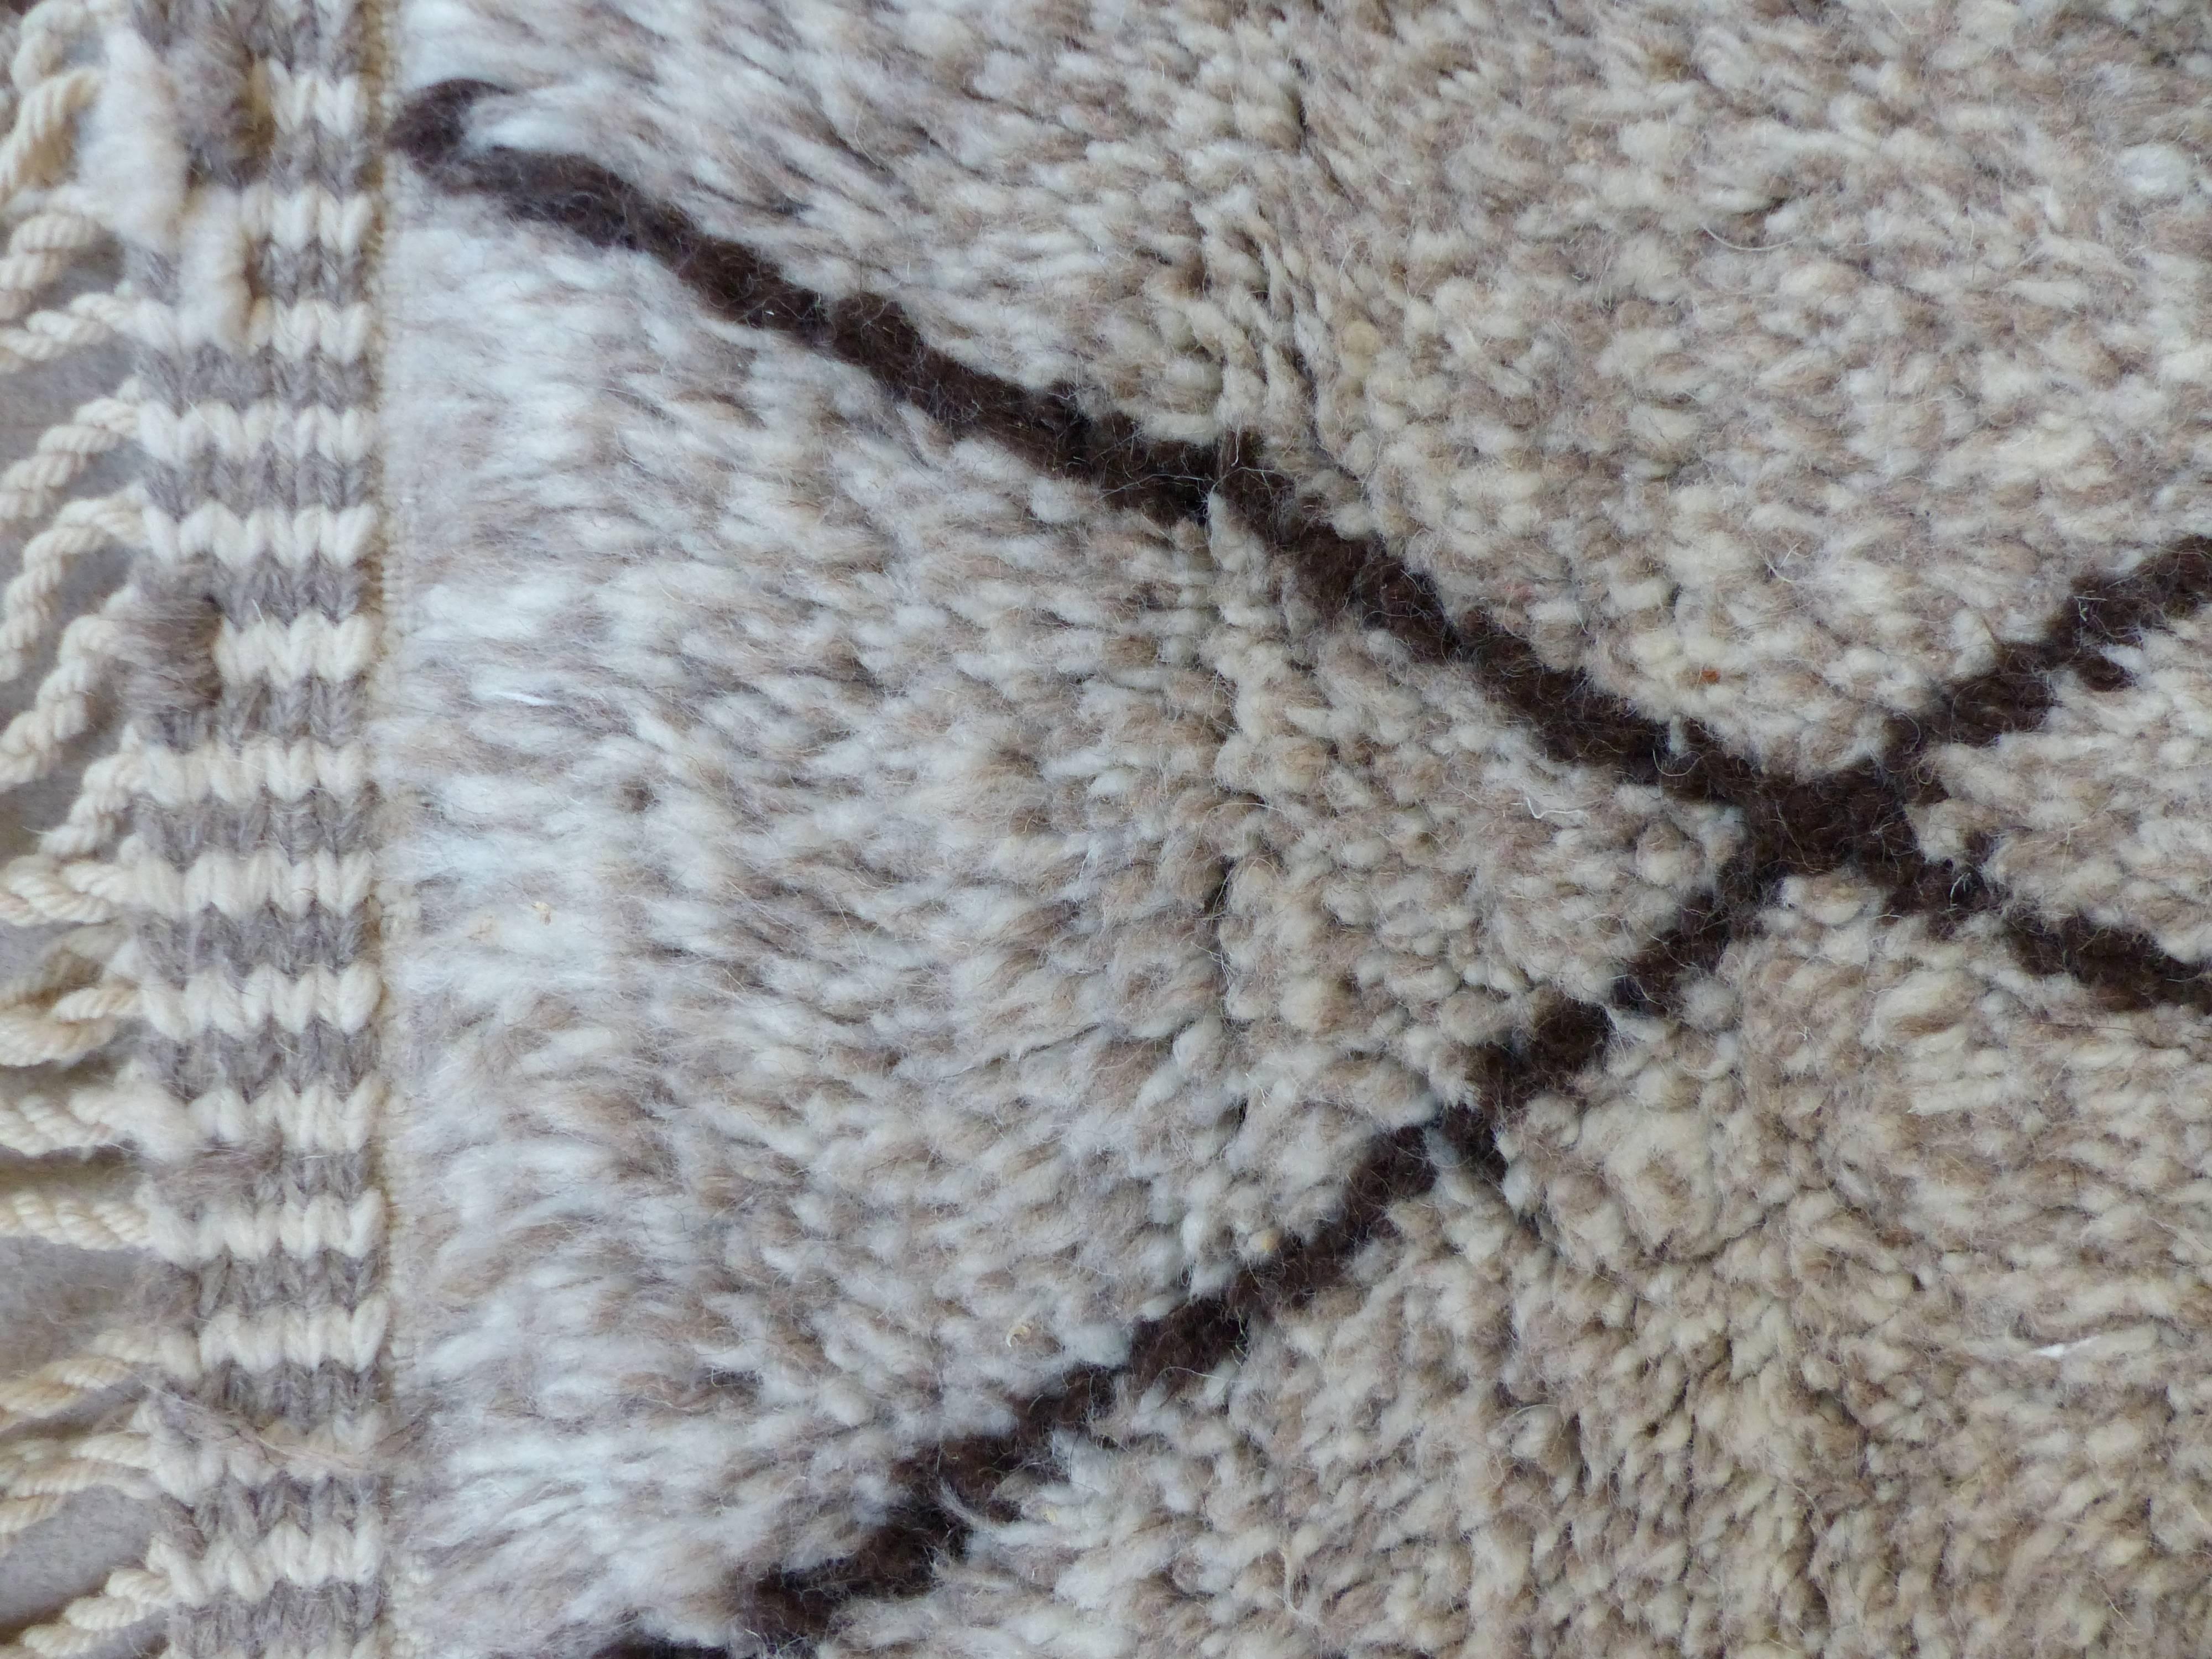 Exceptionally soft, mix of ivory and grey wool carpet made in Mrirt.
Every single knot has both grey and ivory wool which gives a fine shade to the color. Have a look at the detail pictures. These carpets are woven from un-dyed natural wool and